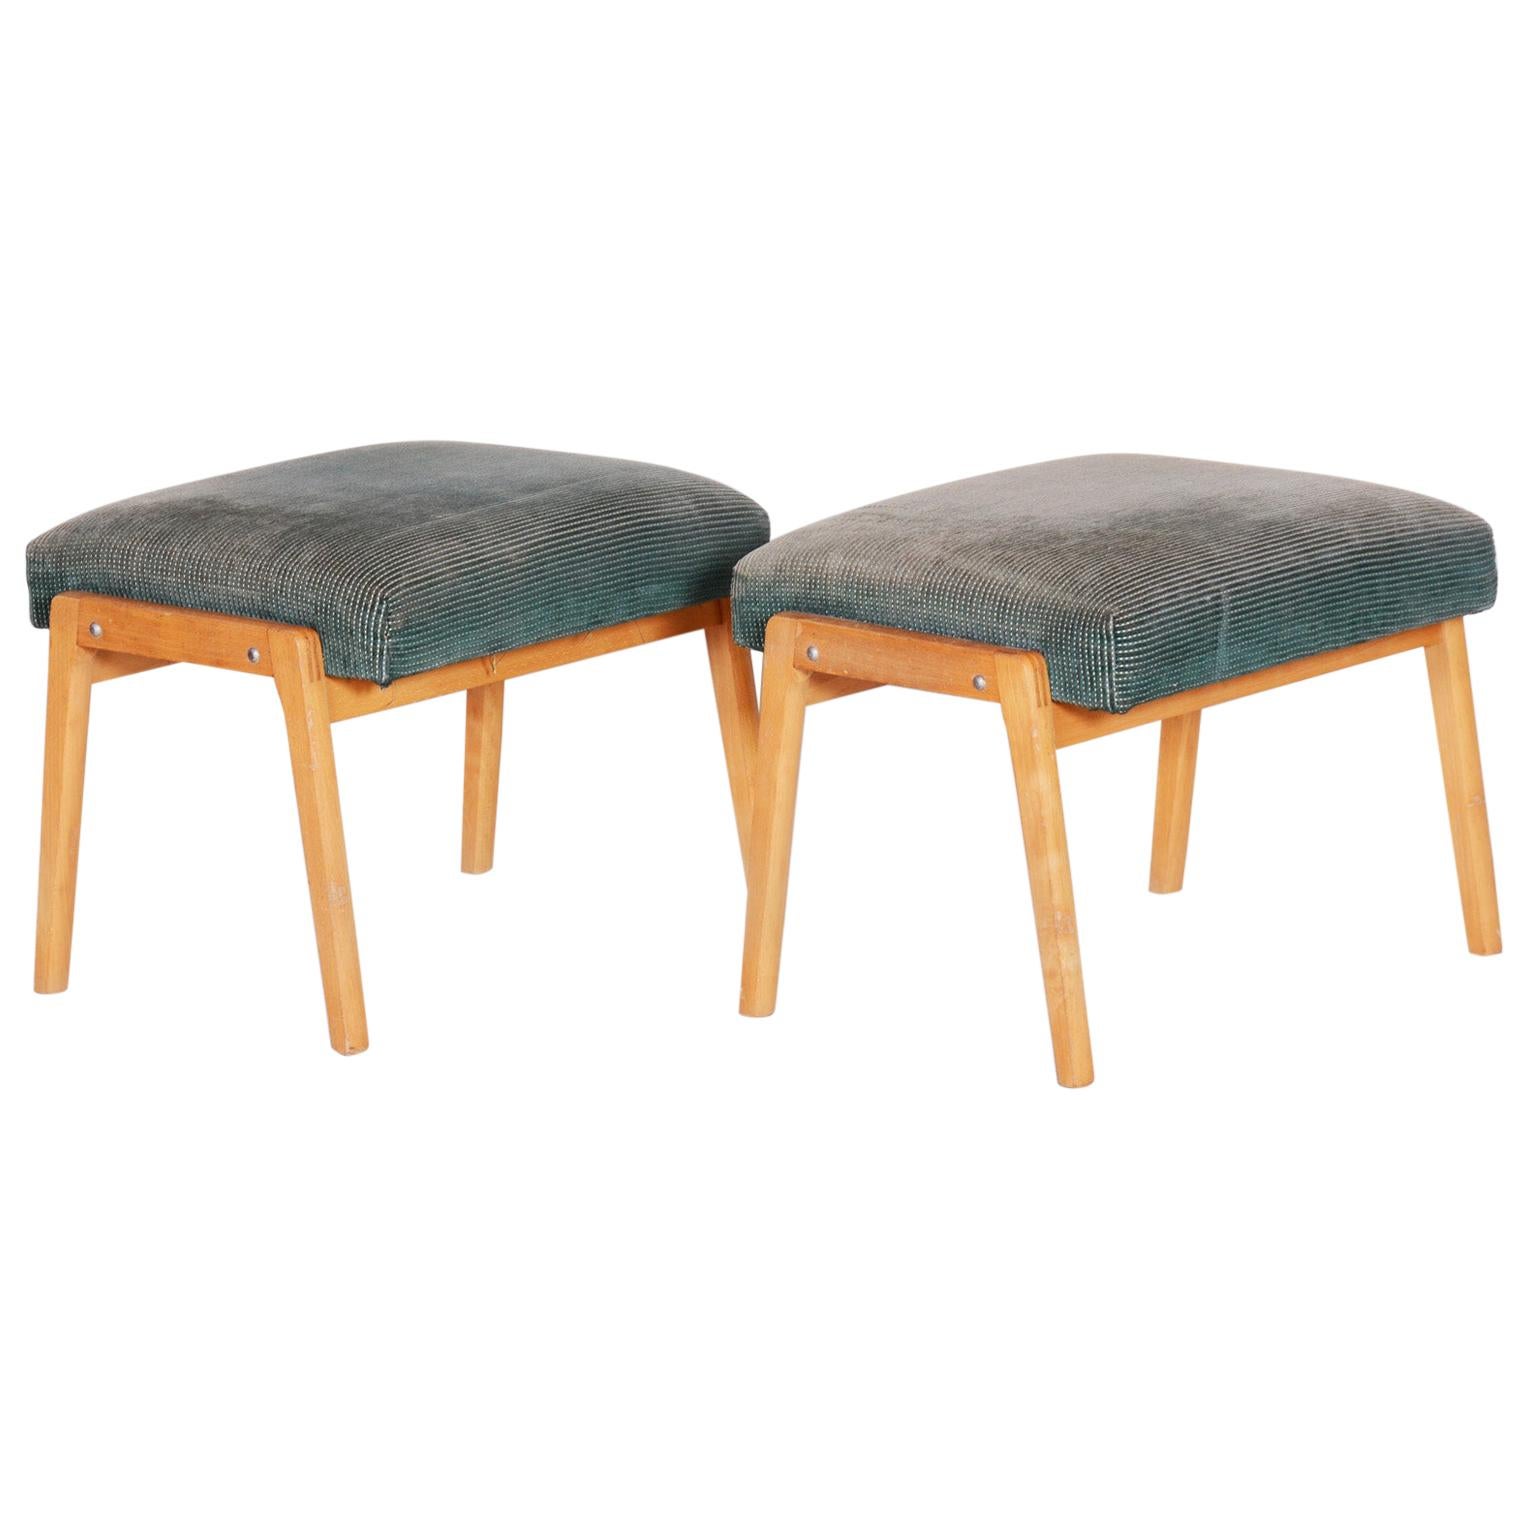 Pair of Midcentury Green Beech Stools, 1960s, Original Preserved Condition